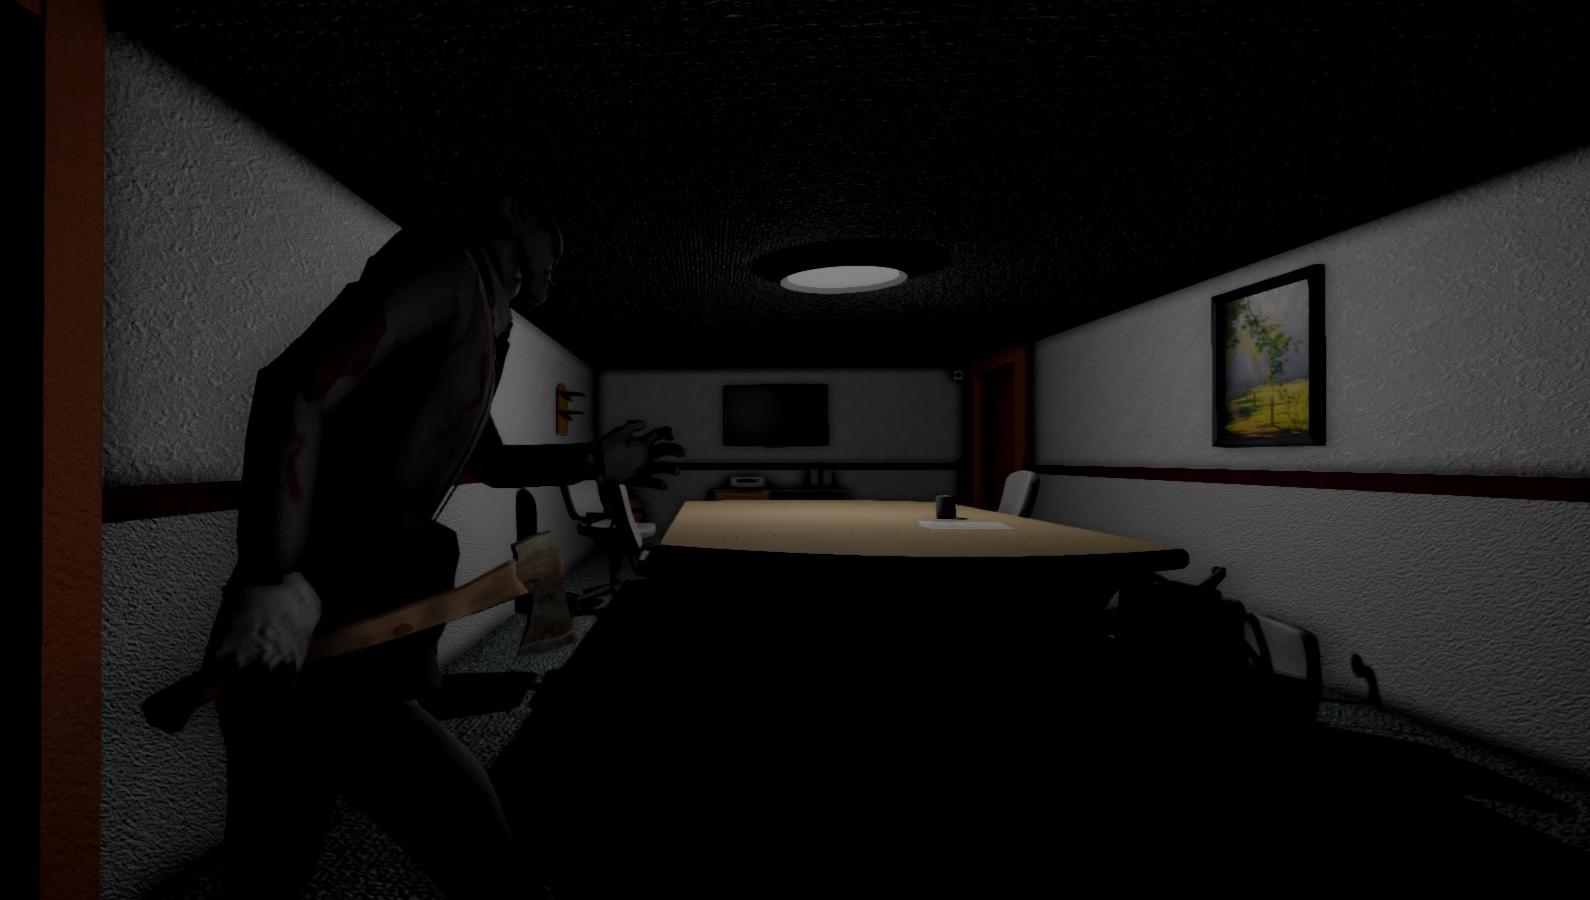 Screenshot №4 from game Shadows 2: Perfidia